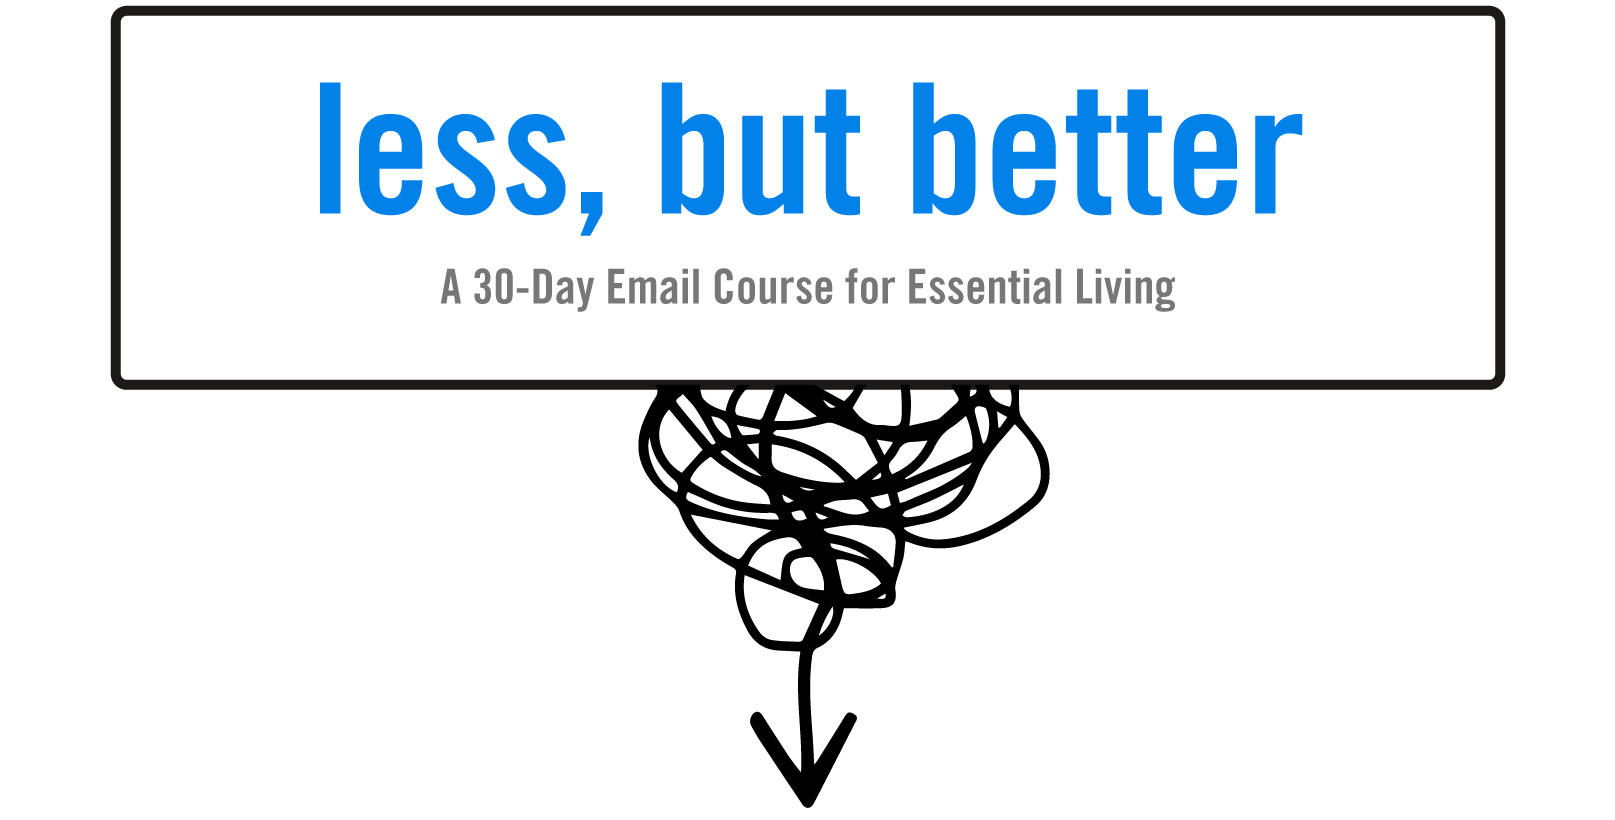 Less, but Better 30-Day Email Course